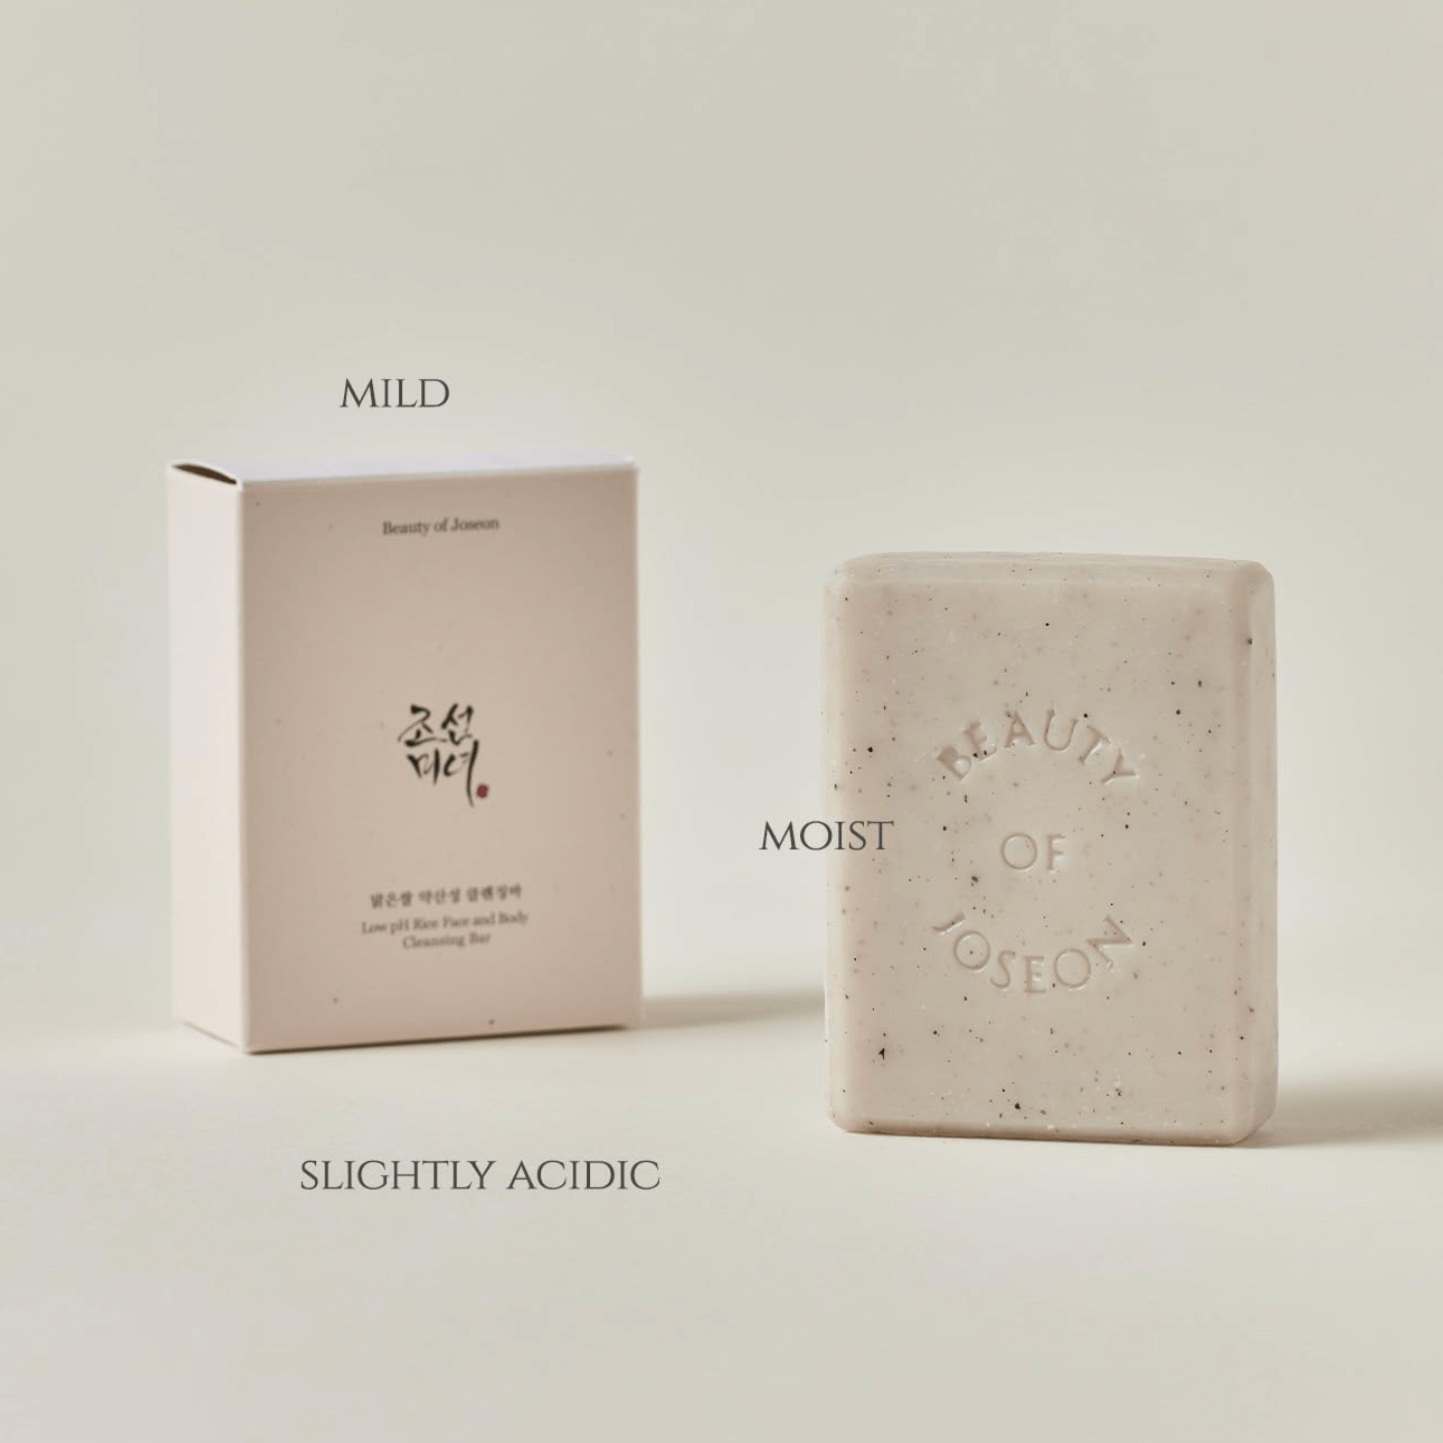 Beauty of Joseon Low pH Rice Face and Body Cleansing Bar Beauty of Joseon